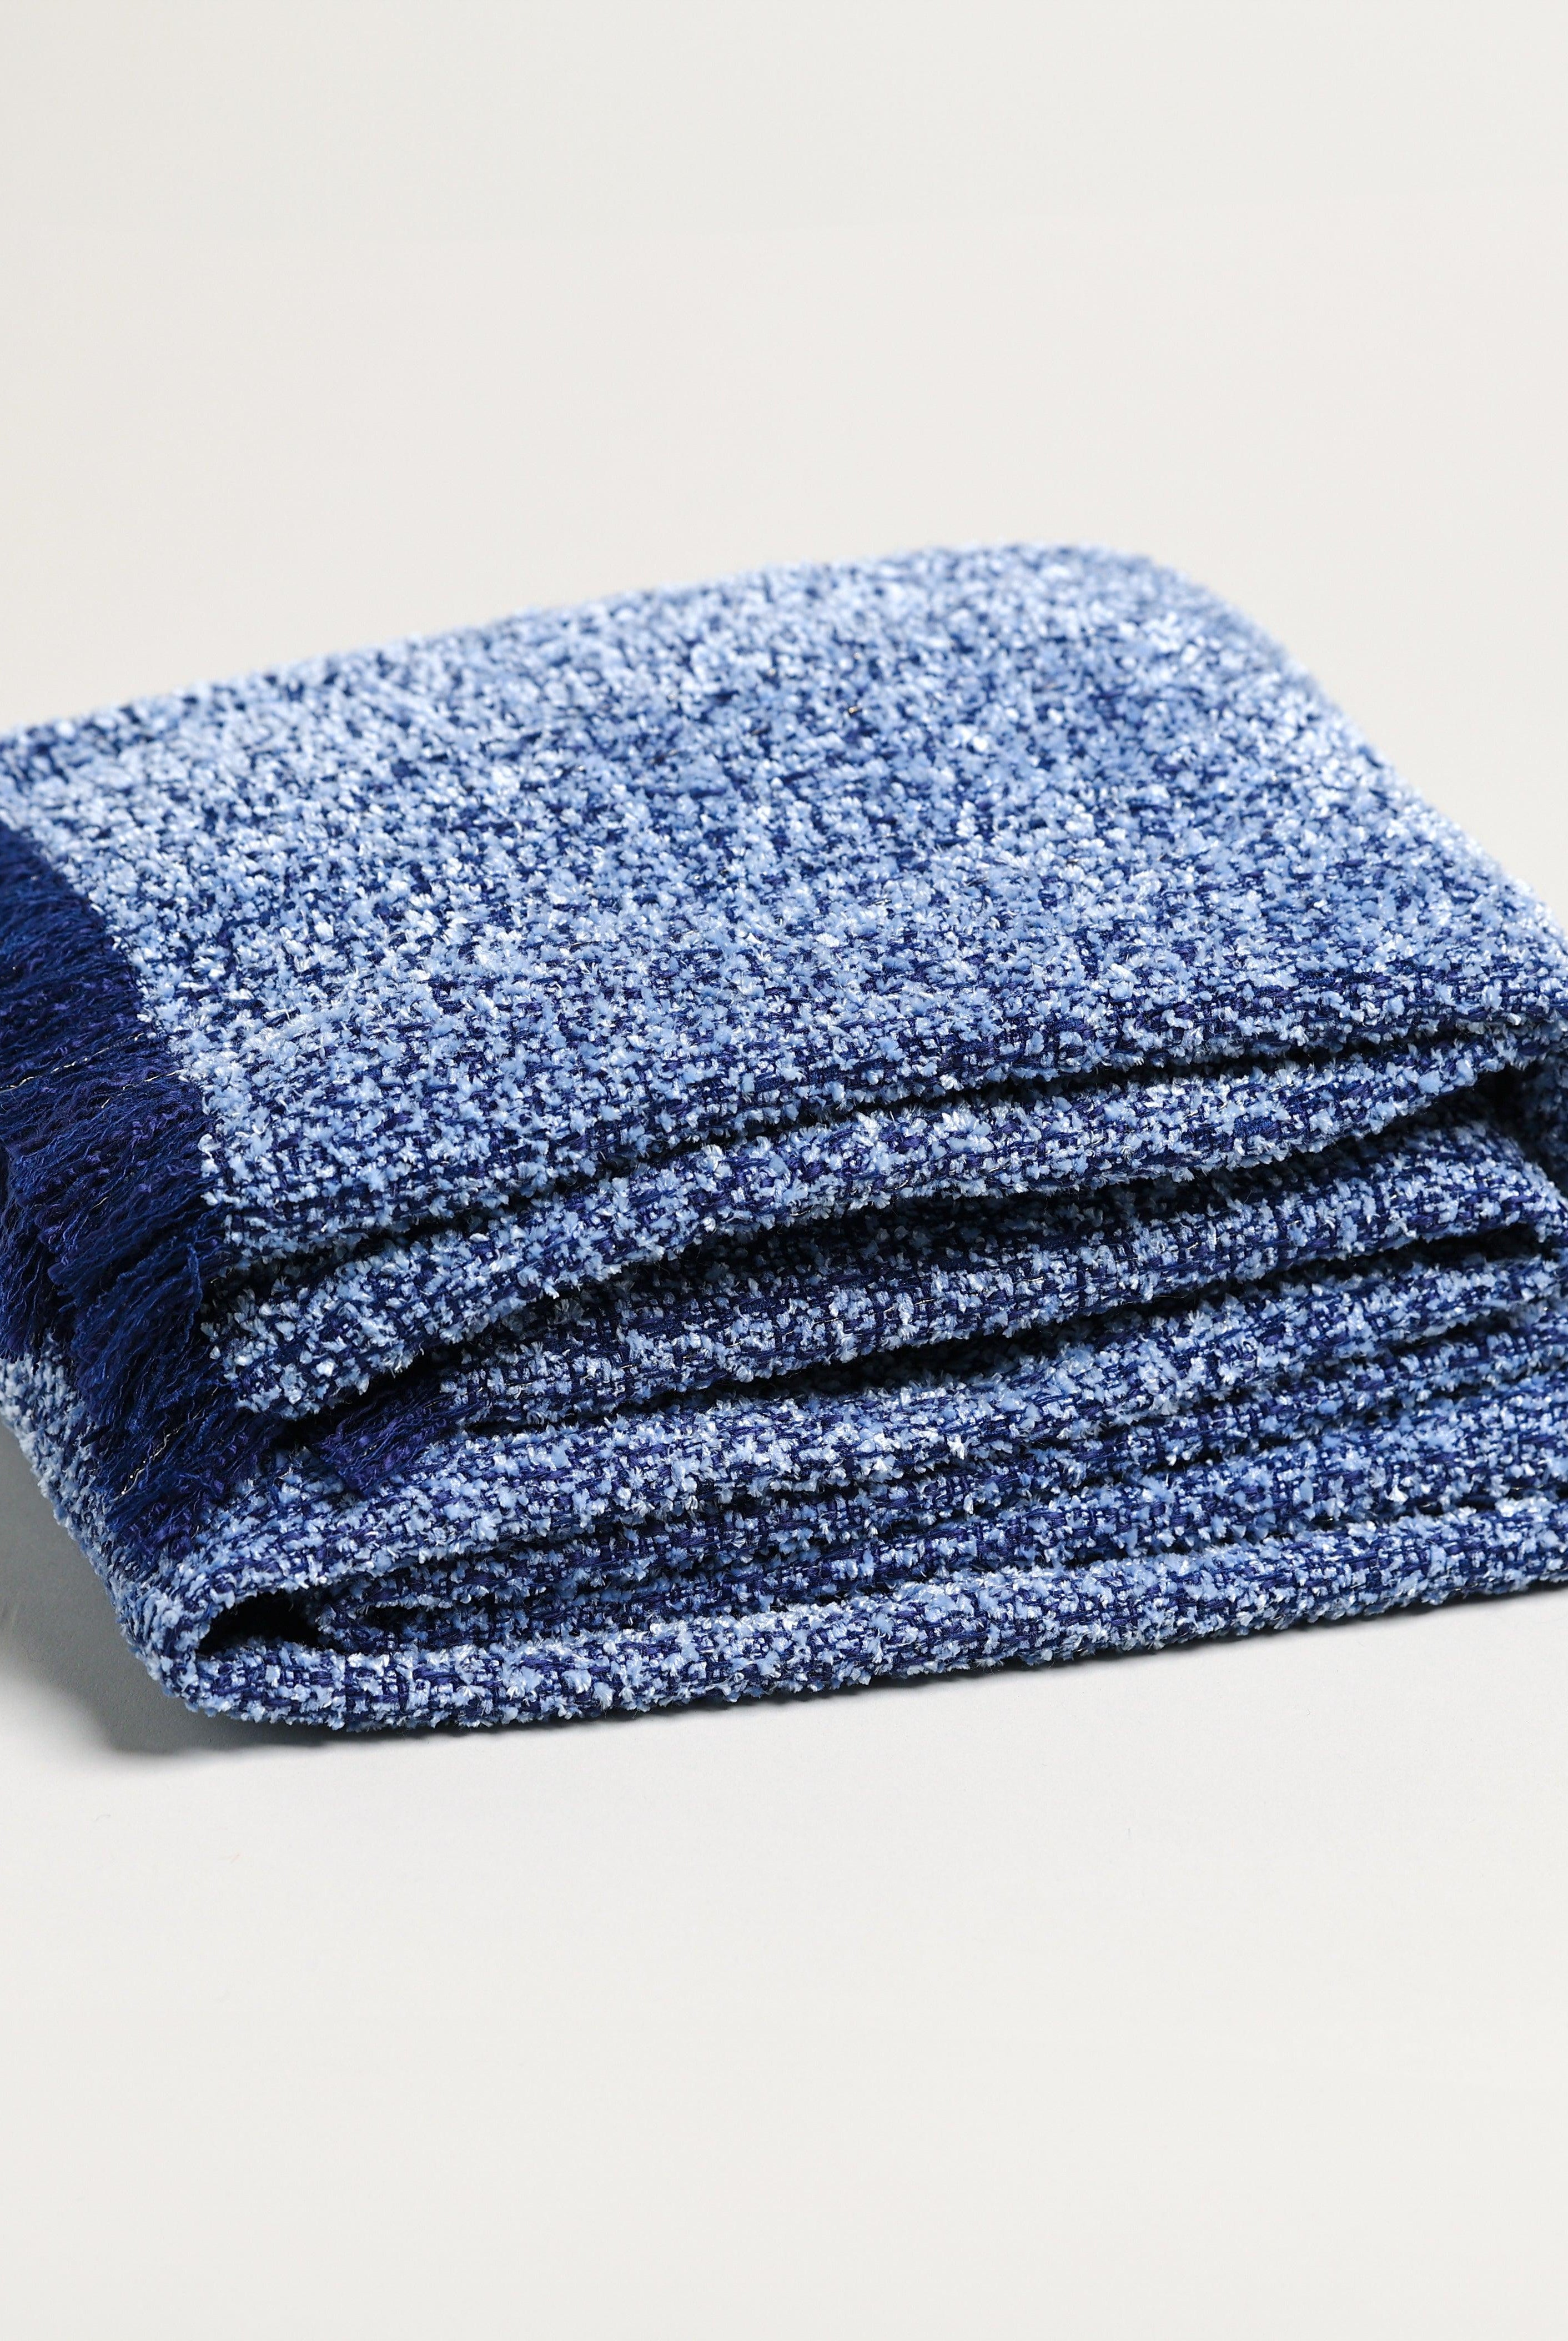 BLUE FUZZYTEXTURED CHENILLE FAUXE DENIM THROW BLANKET - Boucle Home